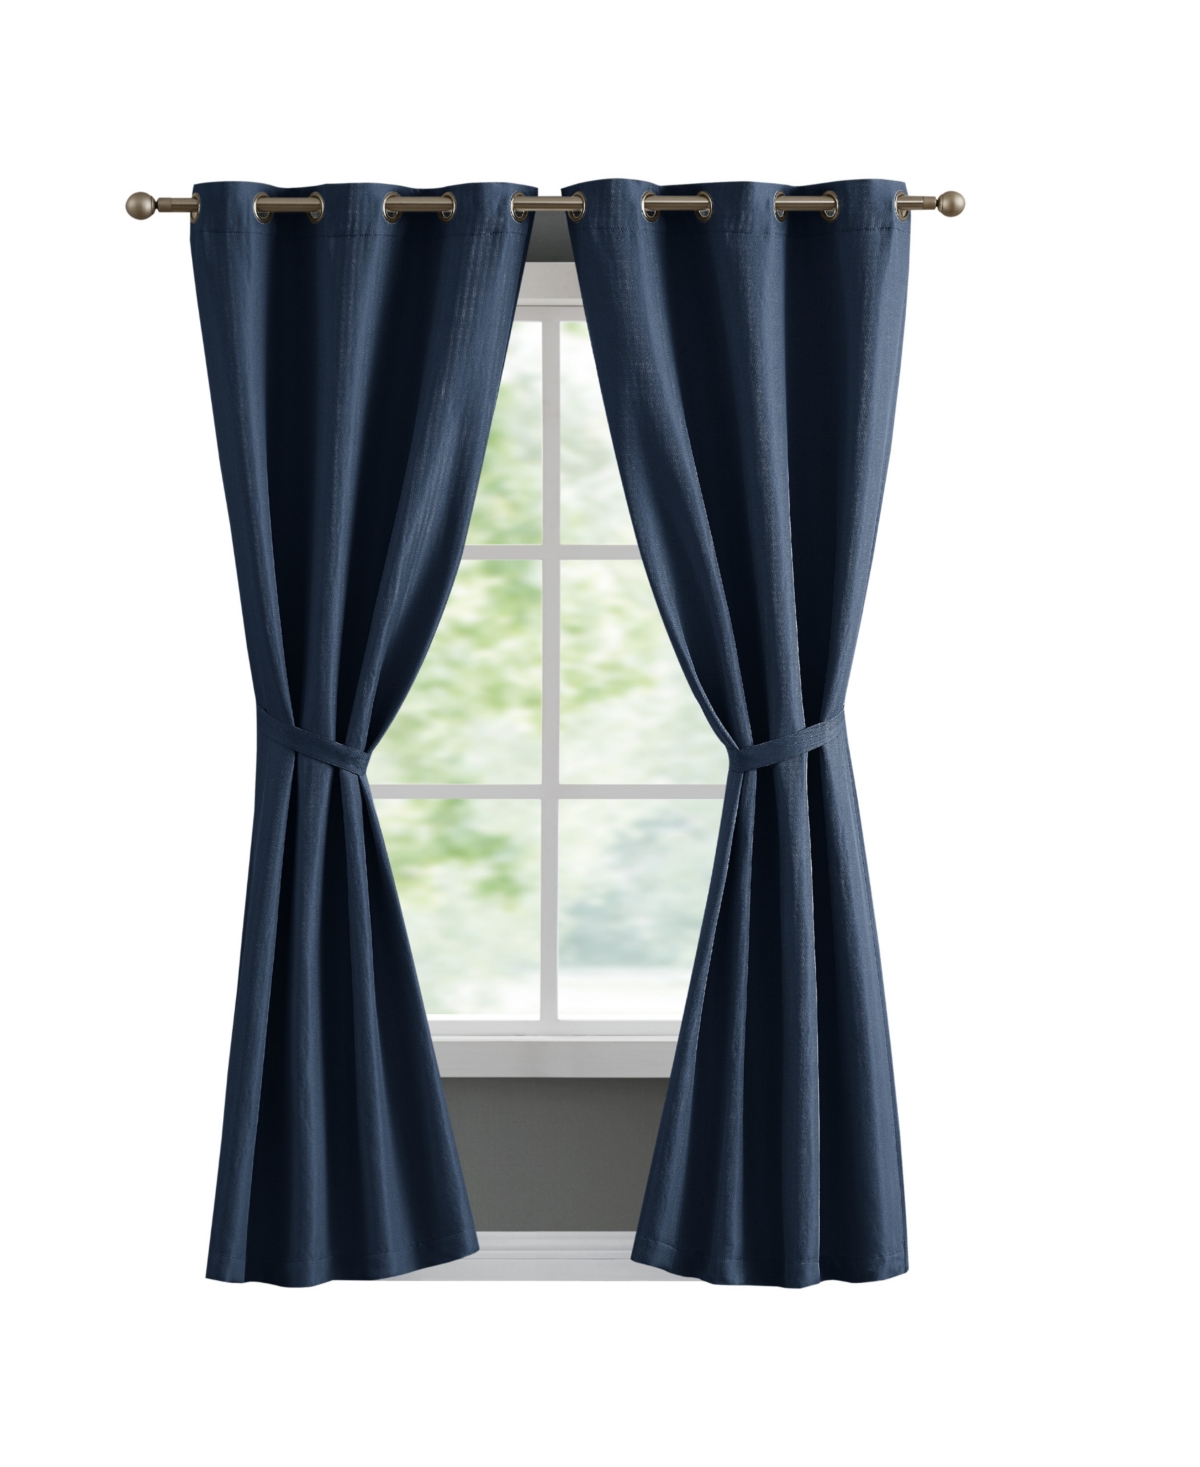 French Connection Tanner Thermal Woven Room Darkening Grommet Window Curtain Panel Pair With Tiebacks, 38" X 96" In Blue